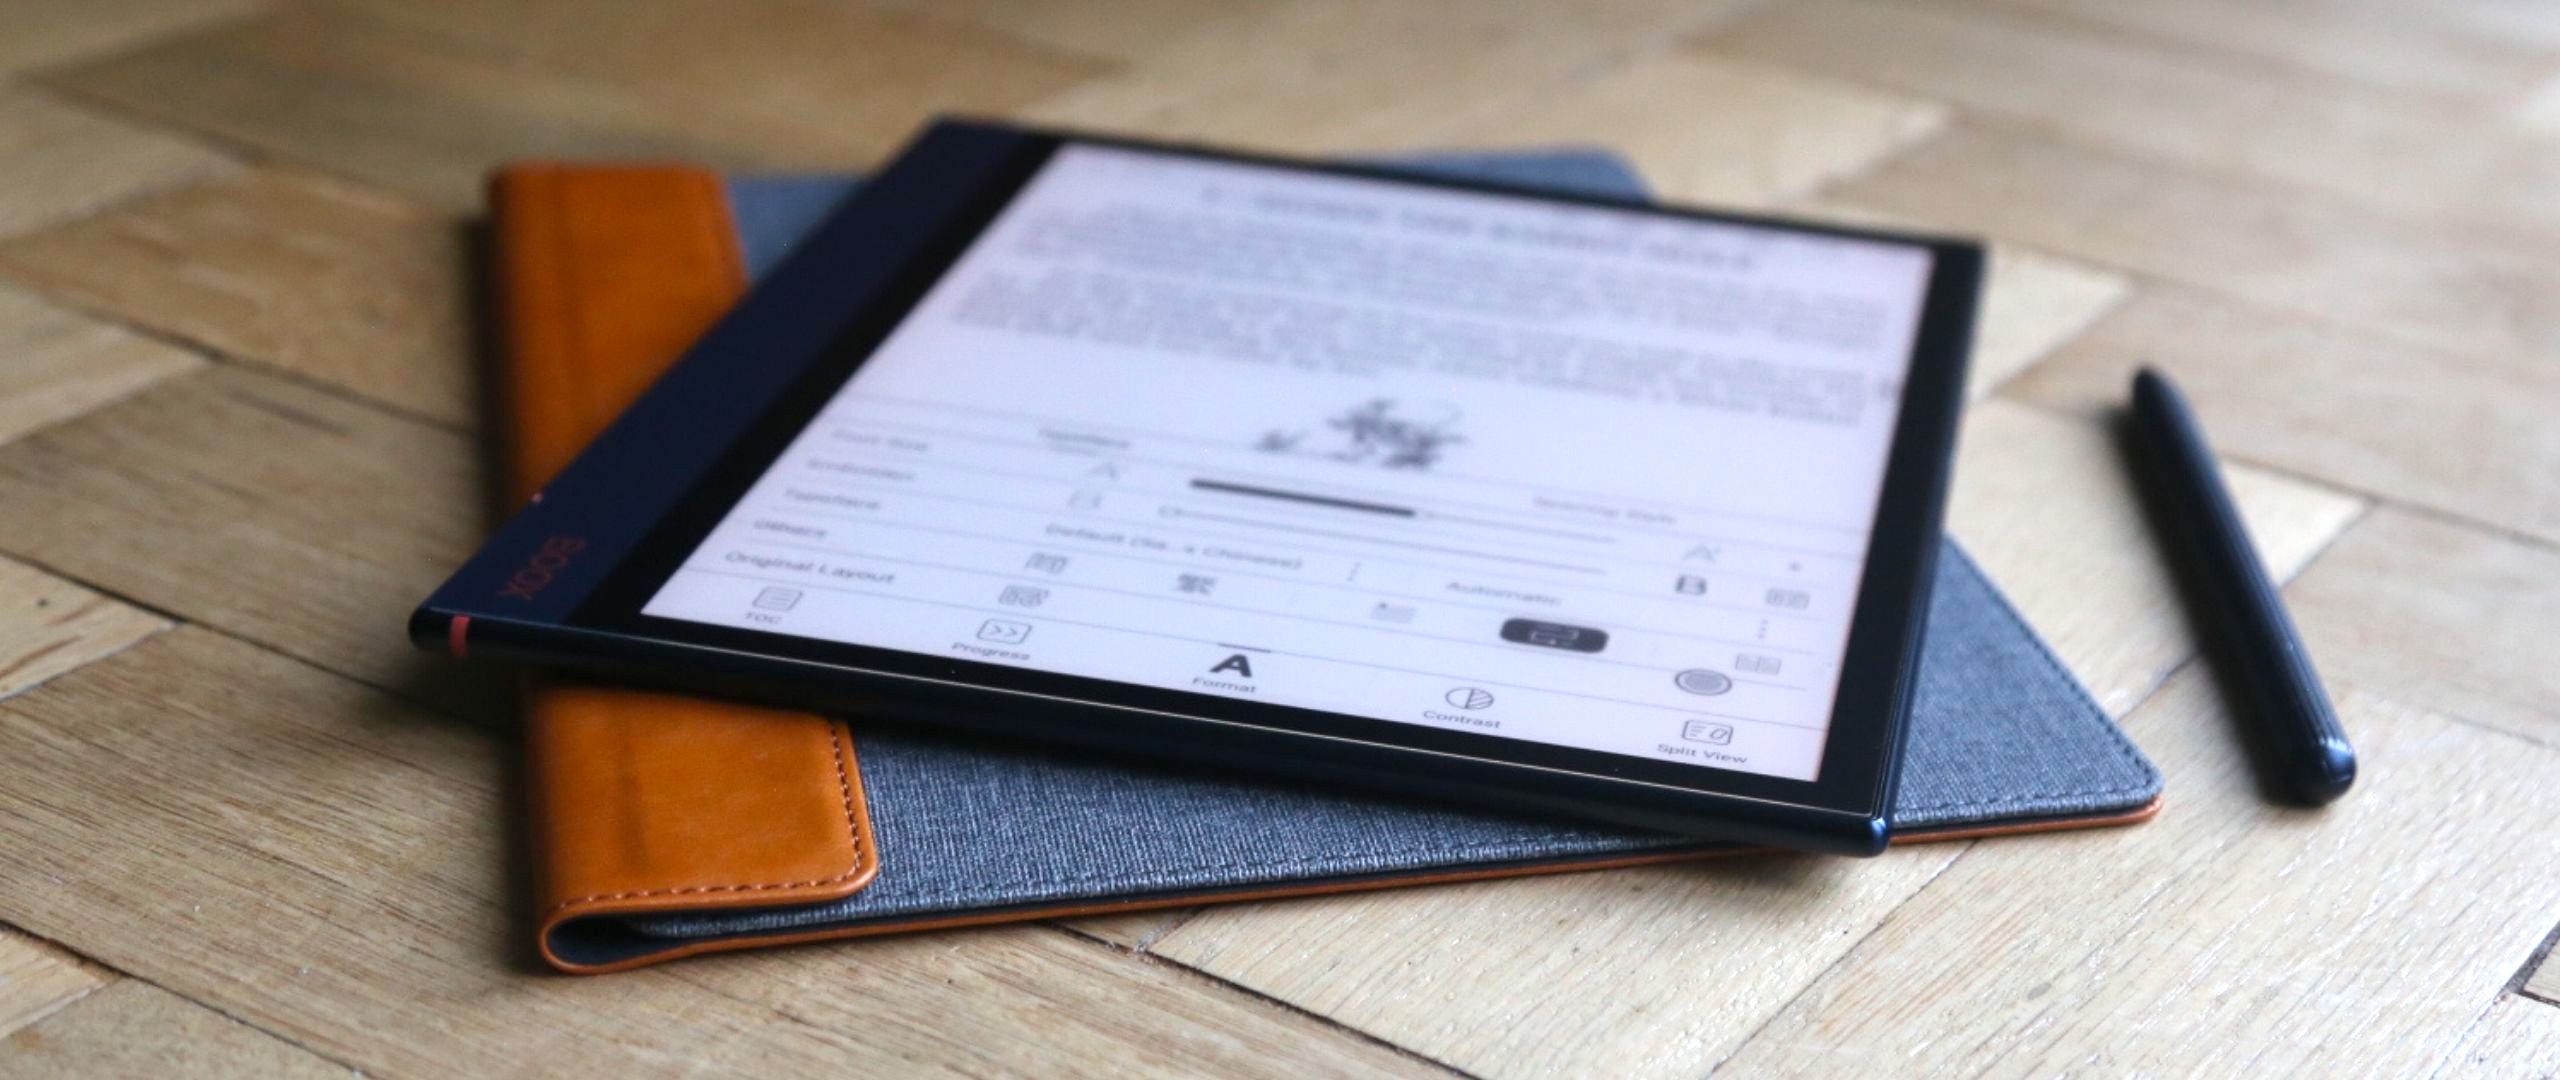 Onyx Boox Note Air 2 E-Ink Tablet Review - 6 Months Later 